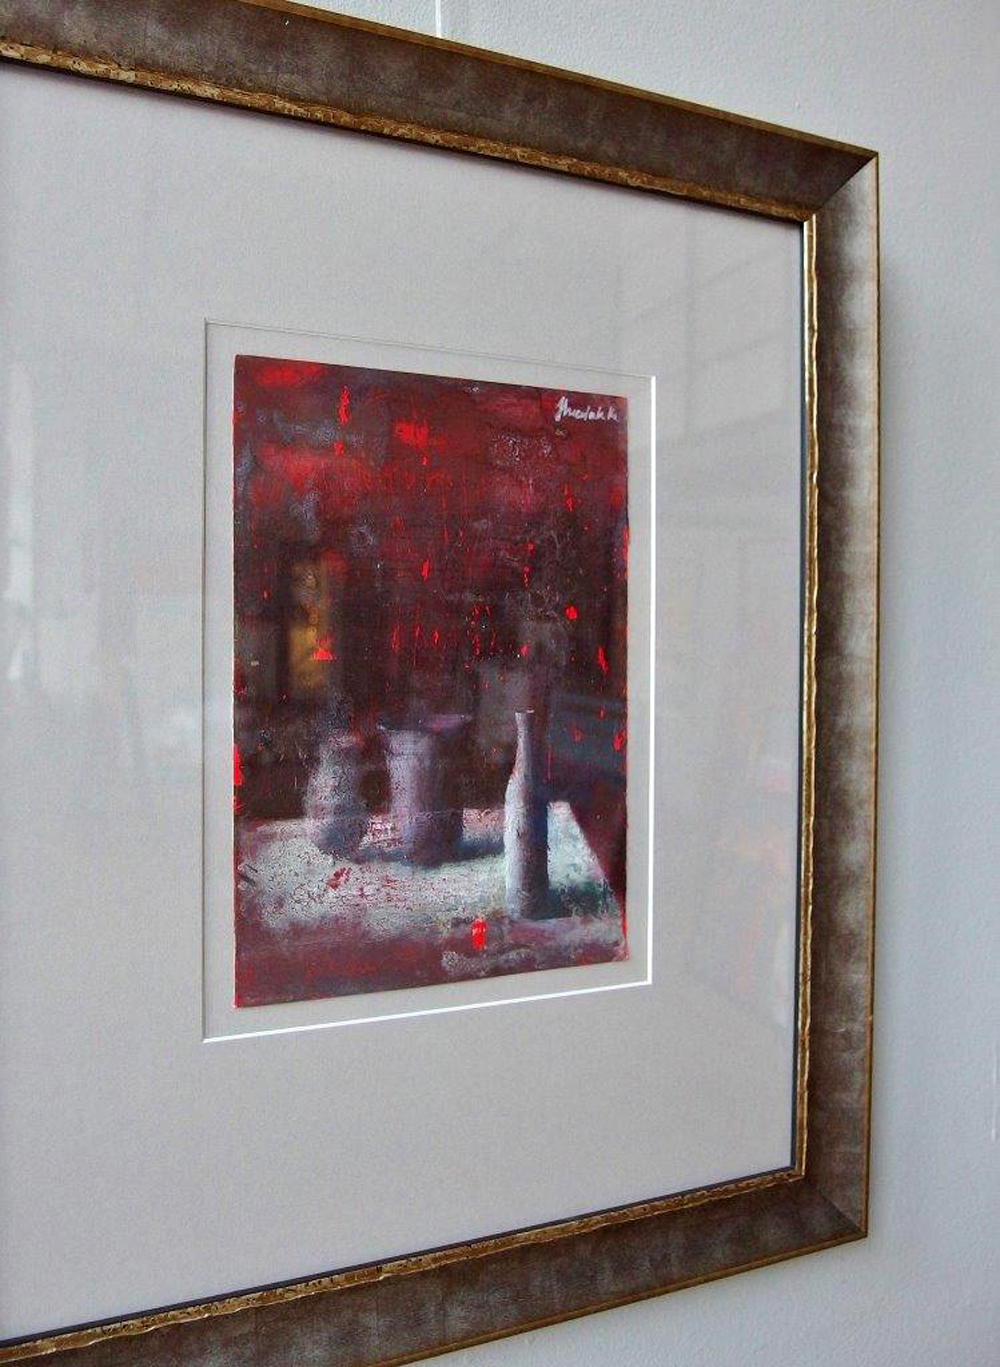 Łukasz Huculak - Composition with drops of red (Tempera on paper | Größe: 40 x 48 cm | Preis: 3500 PLN)